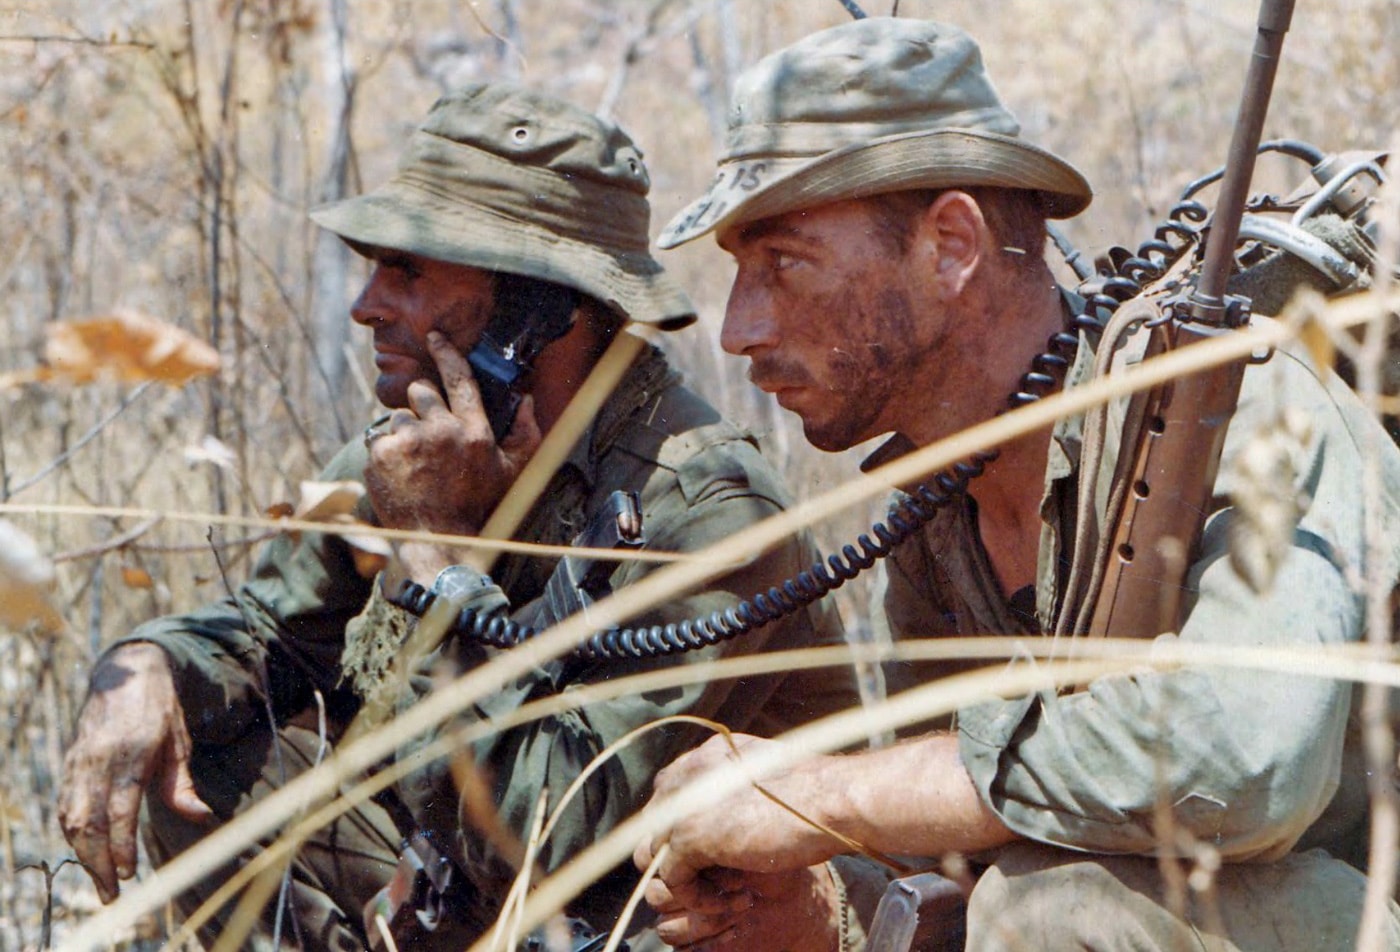 An image from February 1968 shows an Australian platoon sergeant with his radio operator setting an ambush for North Vietnam troops that were moving through the Nui Thi Vai Hills area of South Vietnam. These soldiers were part of 8th Platoon, C Company, 7th Royal Australian Regiment deployed to support the United States and Republic of South Vietnam.